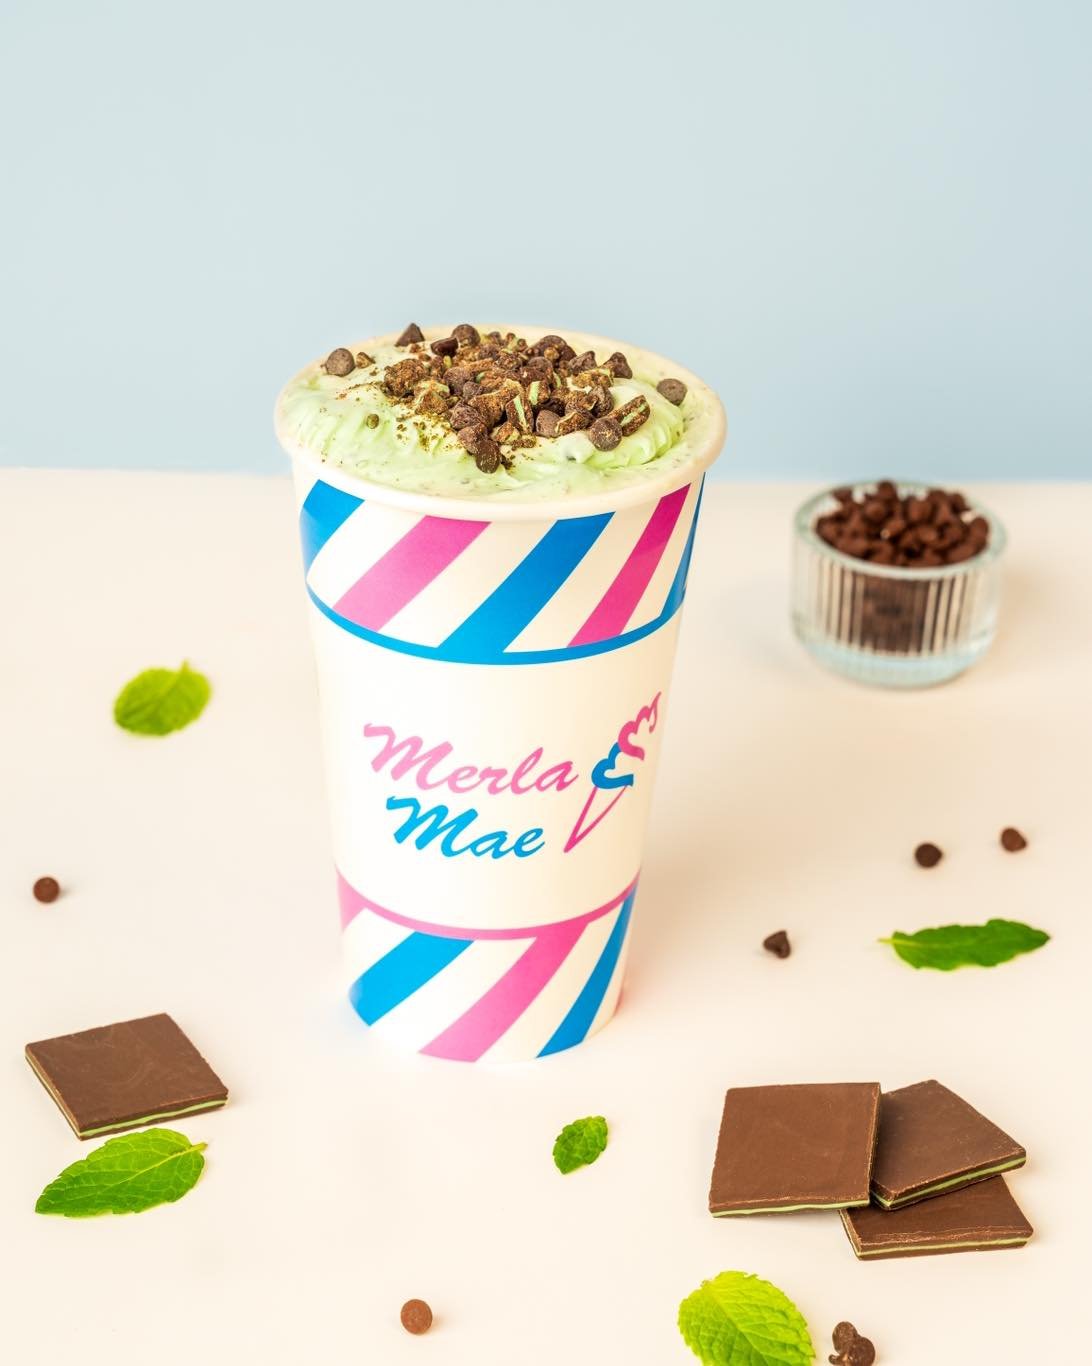 Mint chip is a popular choice~ so try it in our delicious &amp; thick cream shake flurry!

#londonontario #yummy #ldnont #merlamaeicecream #ldn #ldnontario #merlamae #mintchip #creamshake #flurry #icecreamlover #instagood #tasty #icecreamtime #519sho